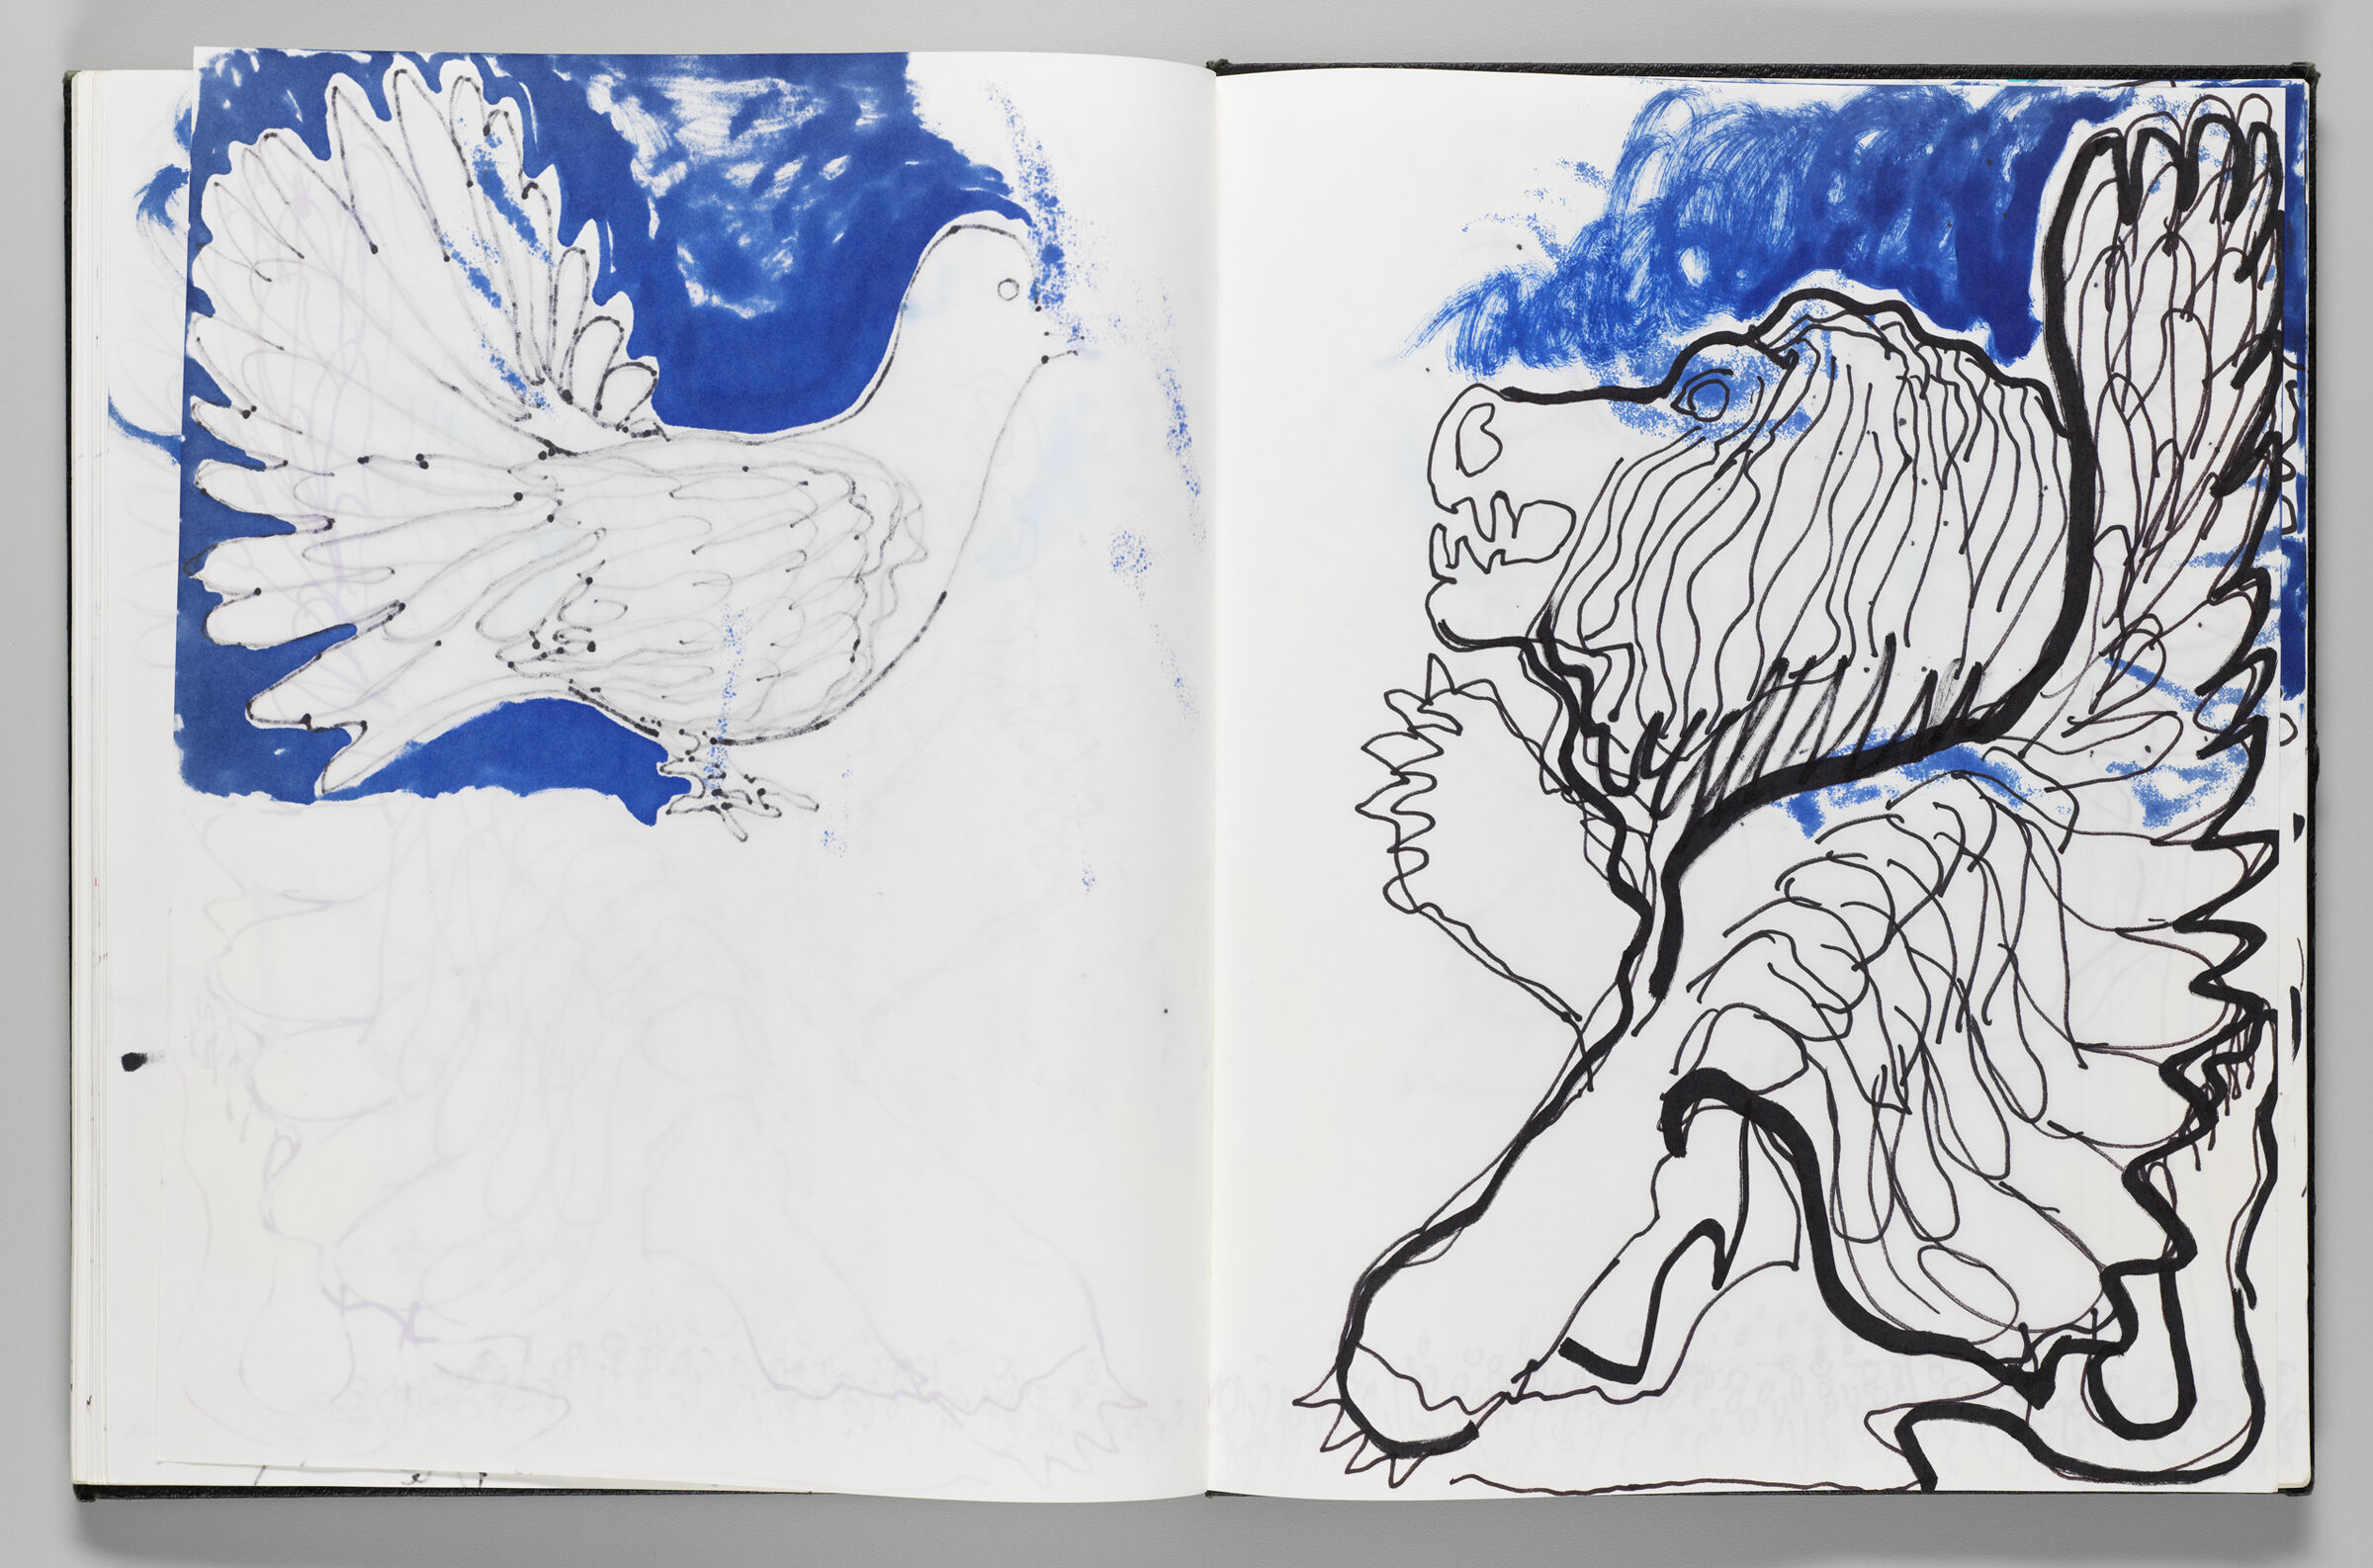 Untitled (Bleed-Through Of Previous Page, Left Page); Untitled (Winged Lion Inflatable [Based On Löwenbrau Logo] With Color Transfer, Right Page)